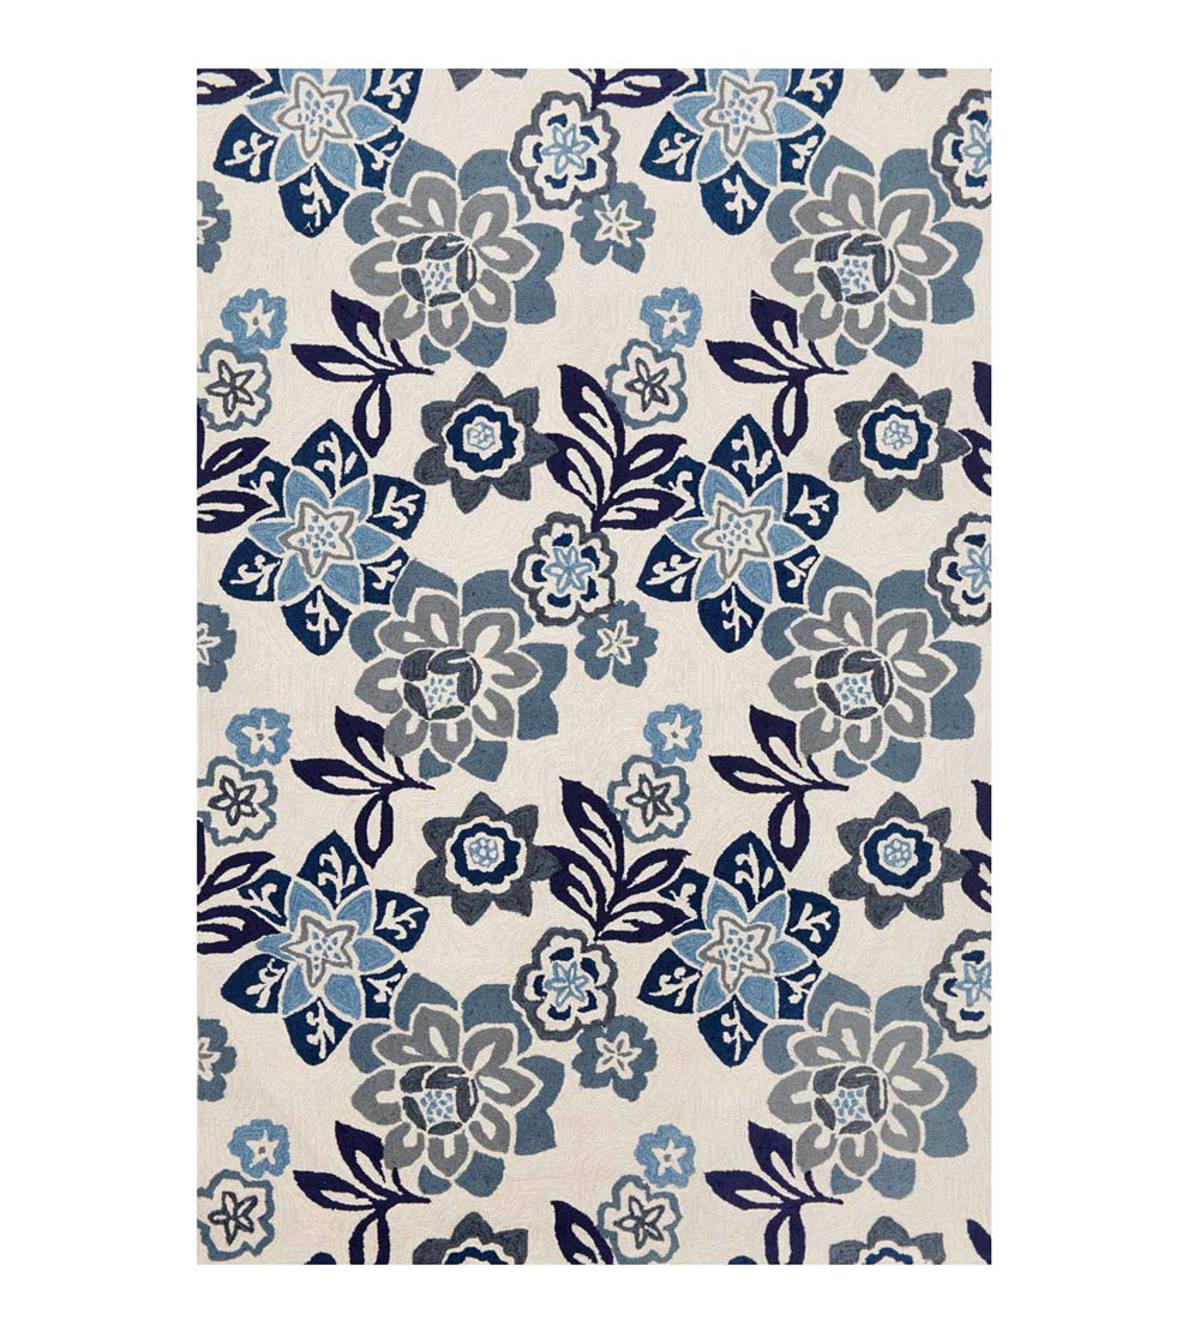 China Blue Floral Accent Rug, 8'3"W x 11'6"L - China Blue